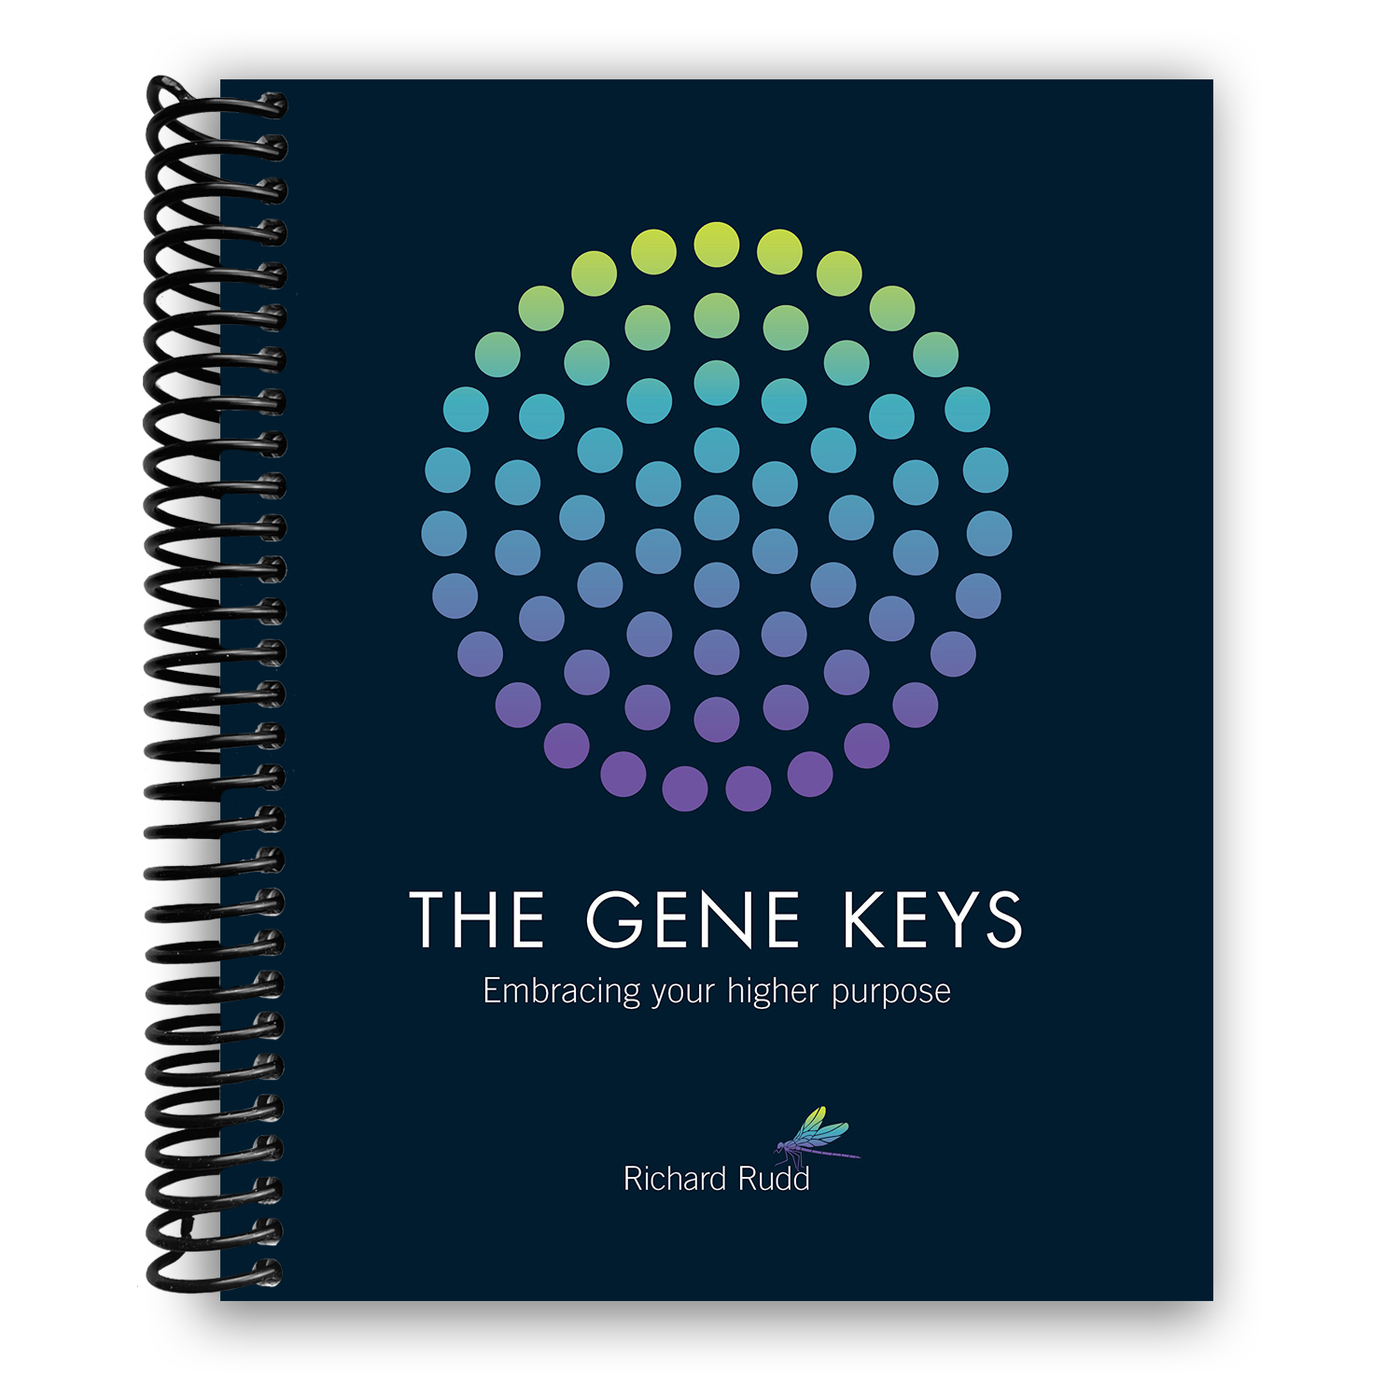 The Gene Keys: Embracing Your Higher Purpose (Spiral Bound)